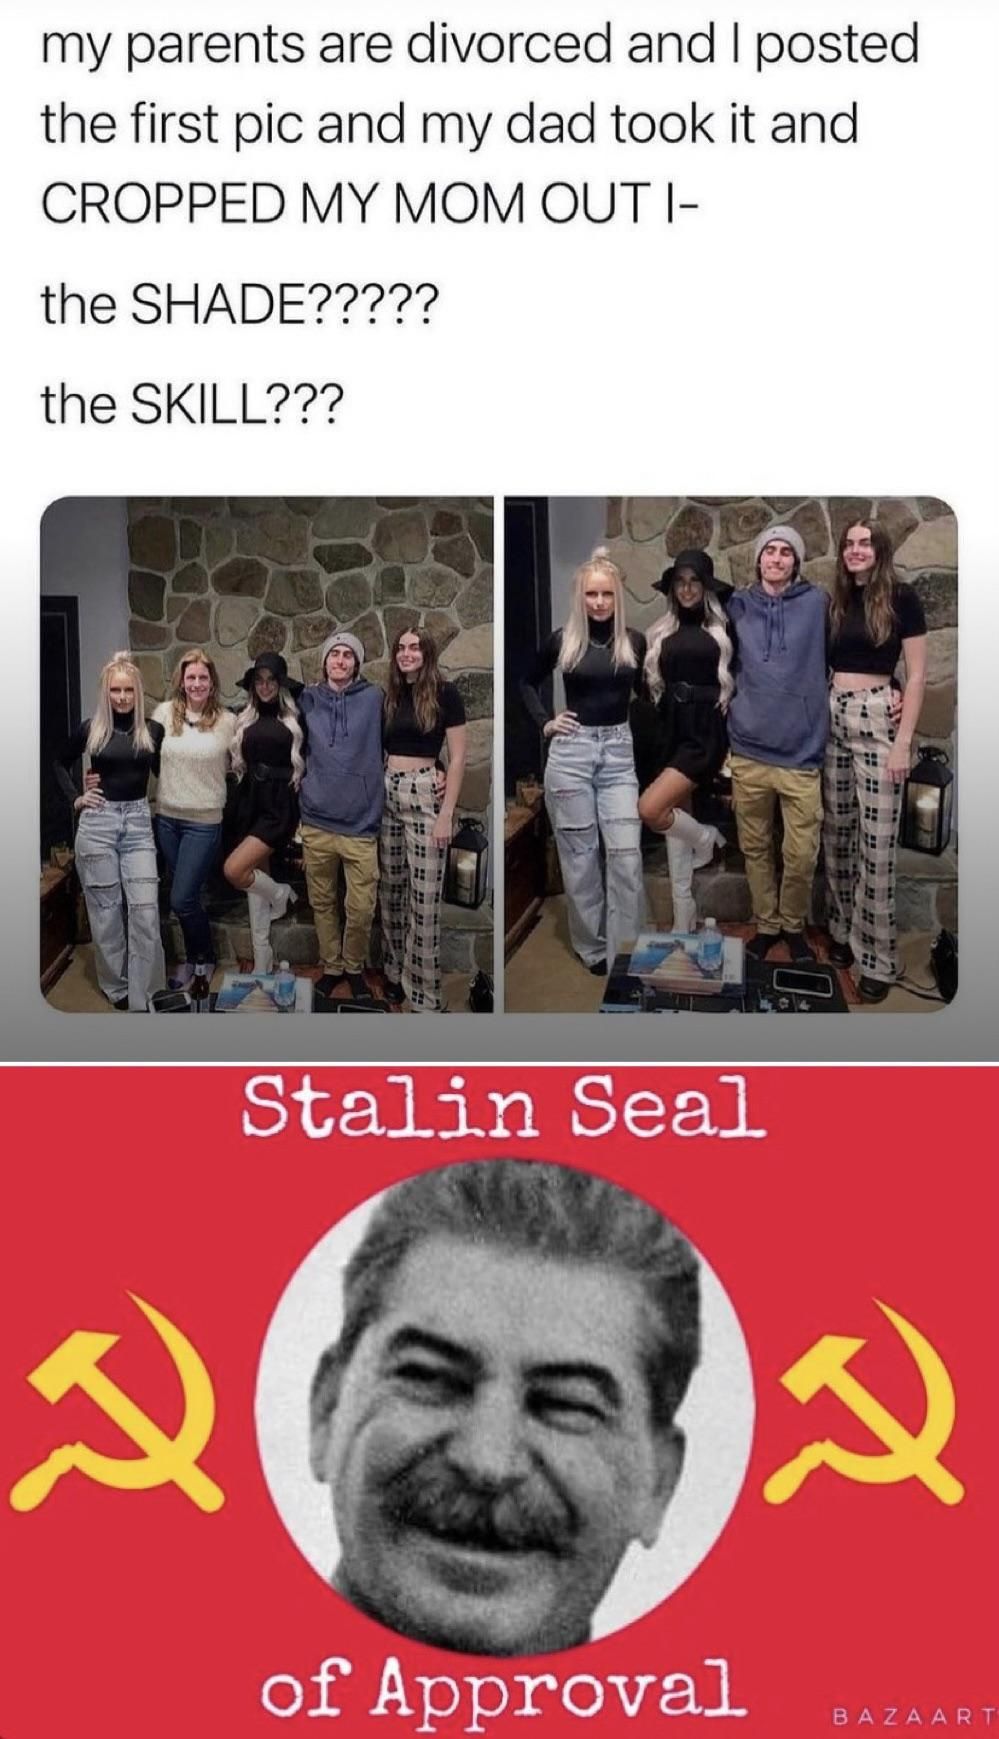 Stalin had been known for removing people from pictures to make himself look better